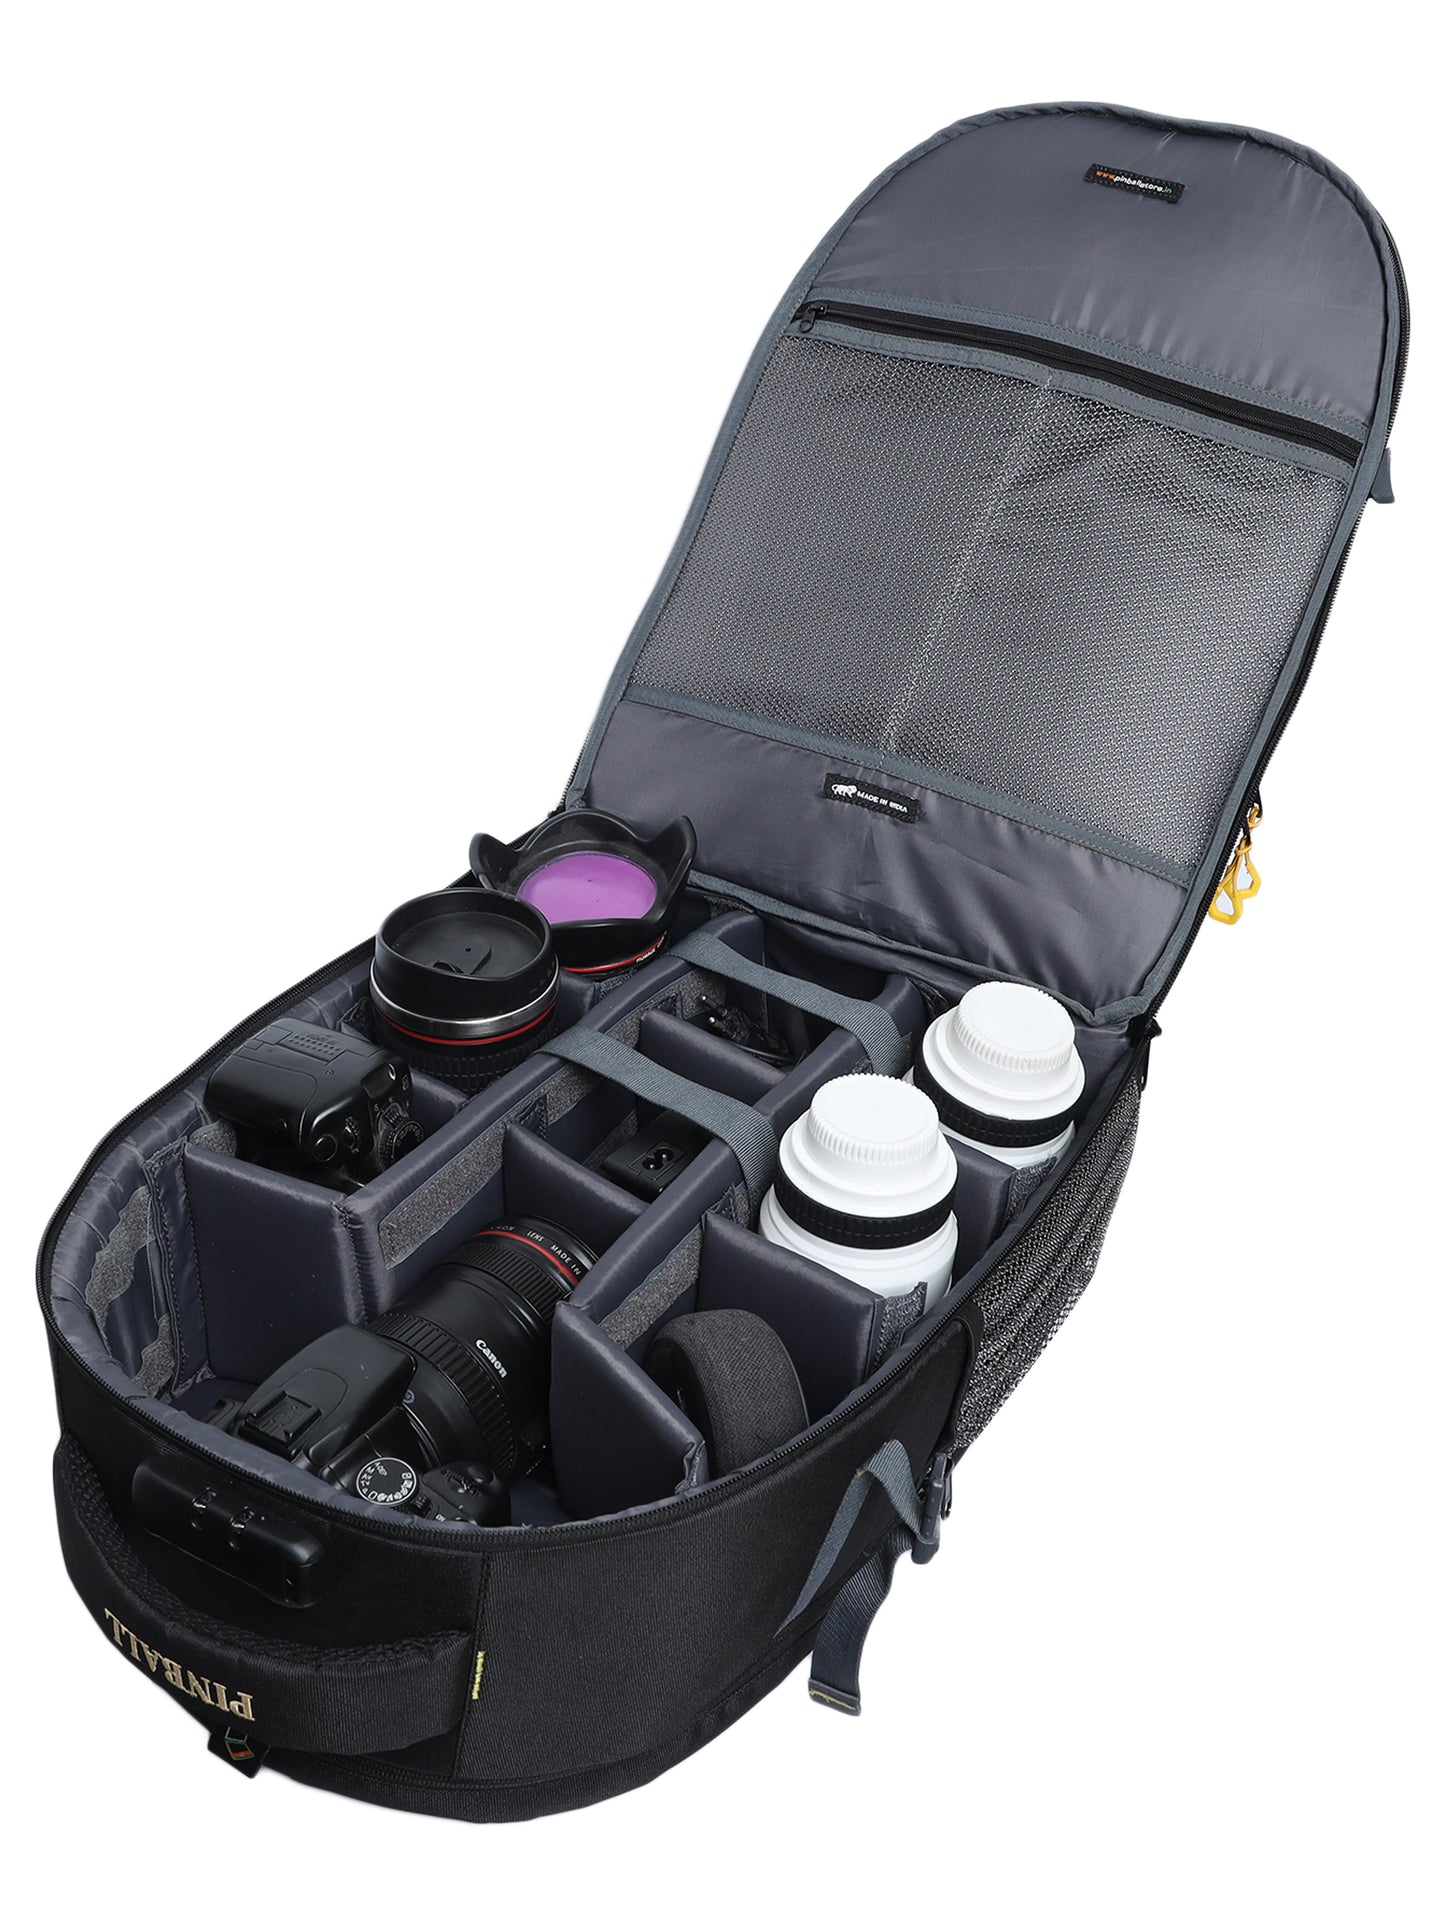 mage: Open view of the G13 BPL 4 DSLR camera bag, displaying a meticulously arranged collection of cameras, lenses, tripods, flashes, and other photography equipment. The bag's spacious compartments and customizable organization provide convenient storage and easy access to gear during photo shoots.